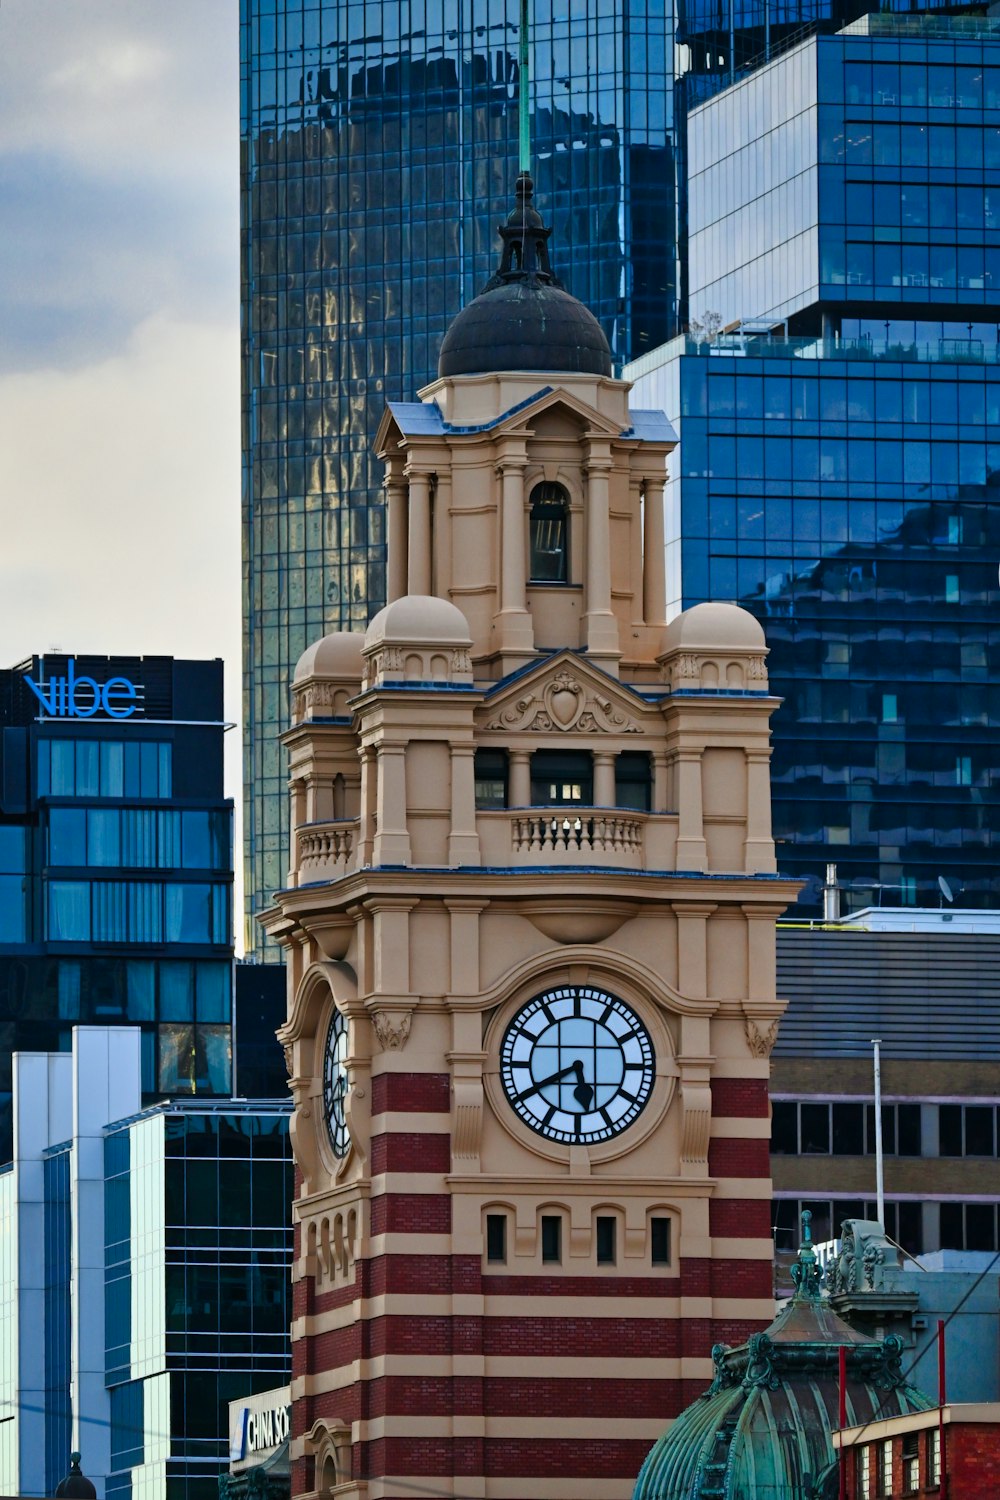 a large clock tower with a sky scraper in the background